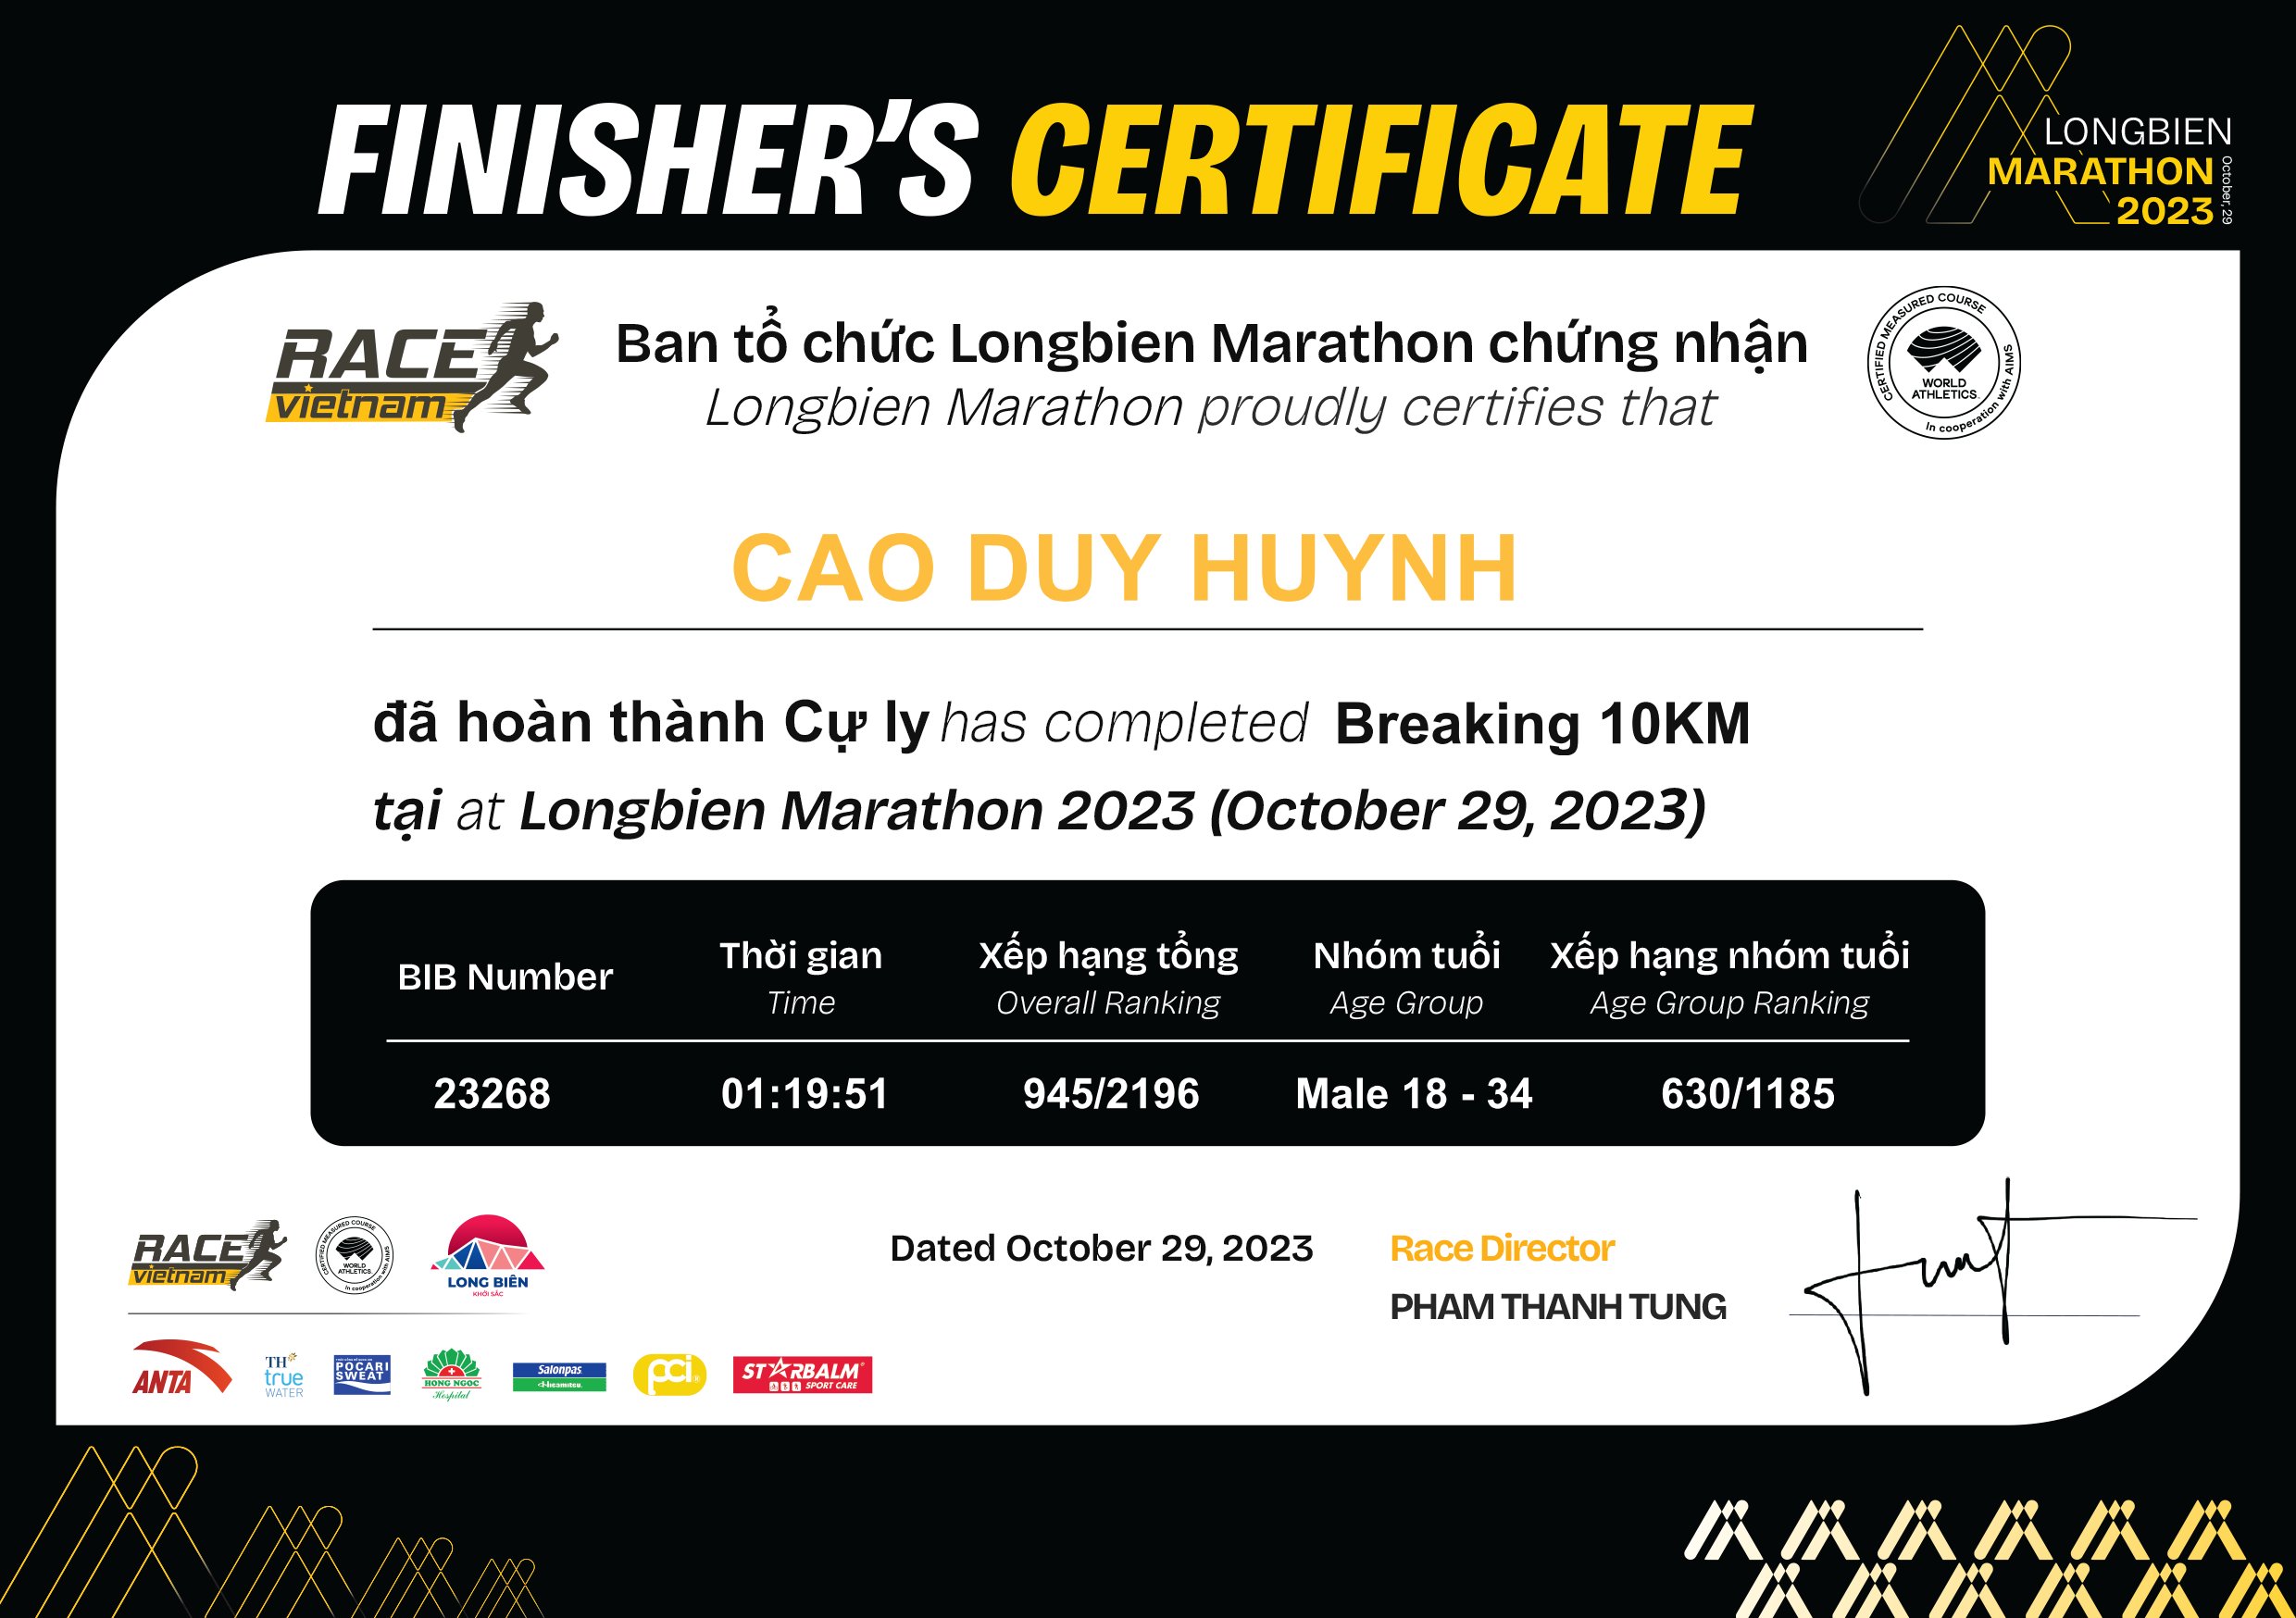 23268 - Cao Duy Huynh